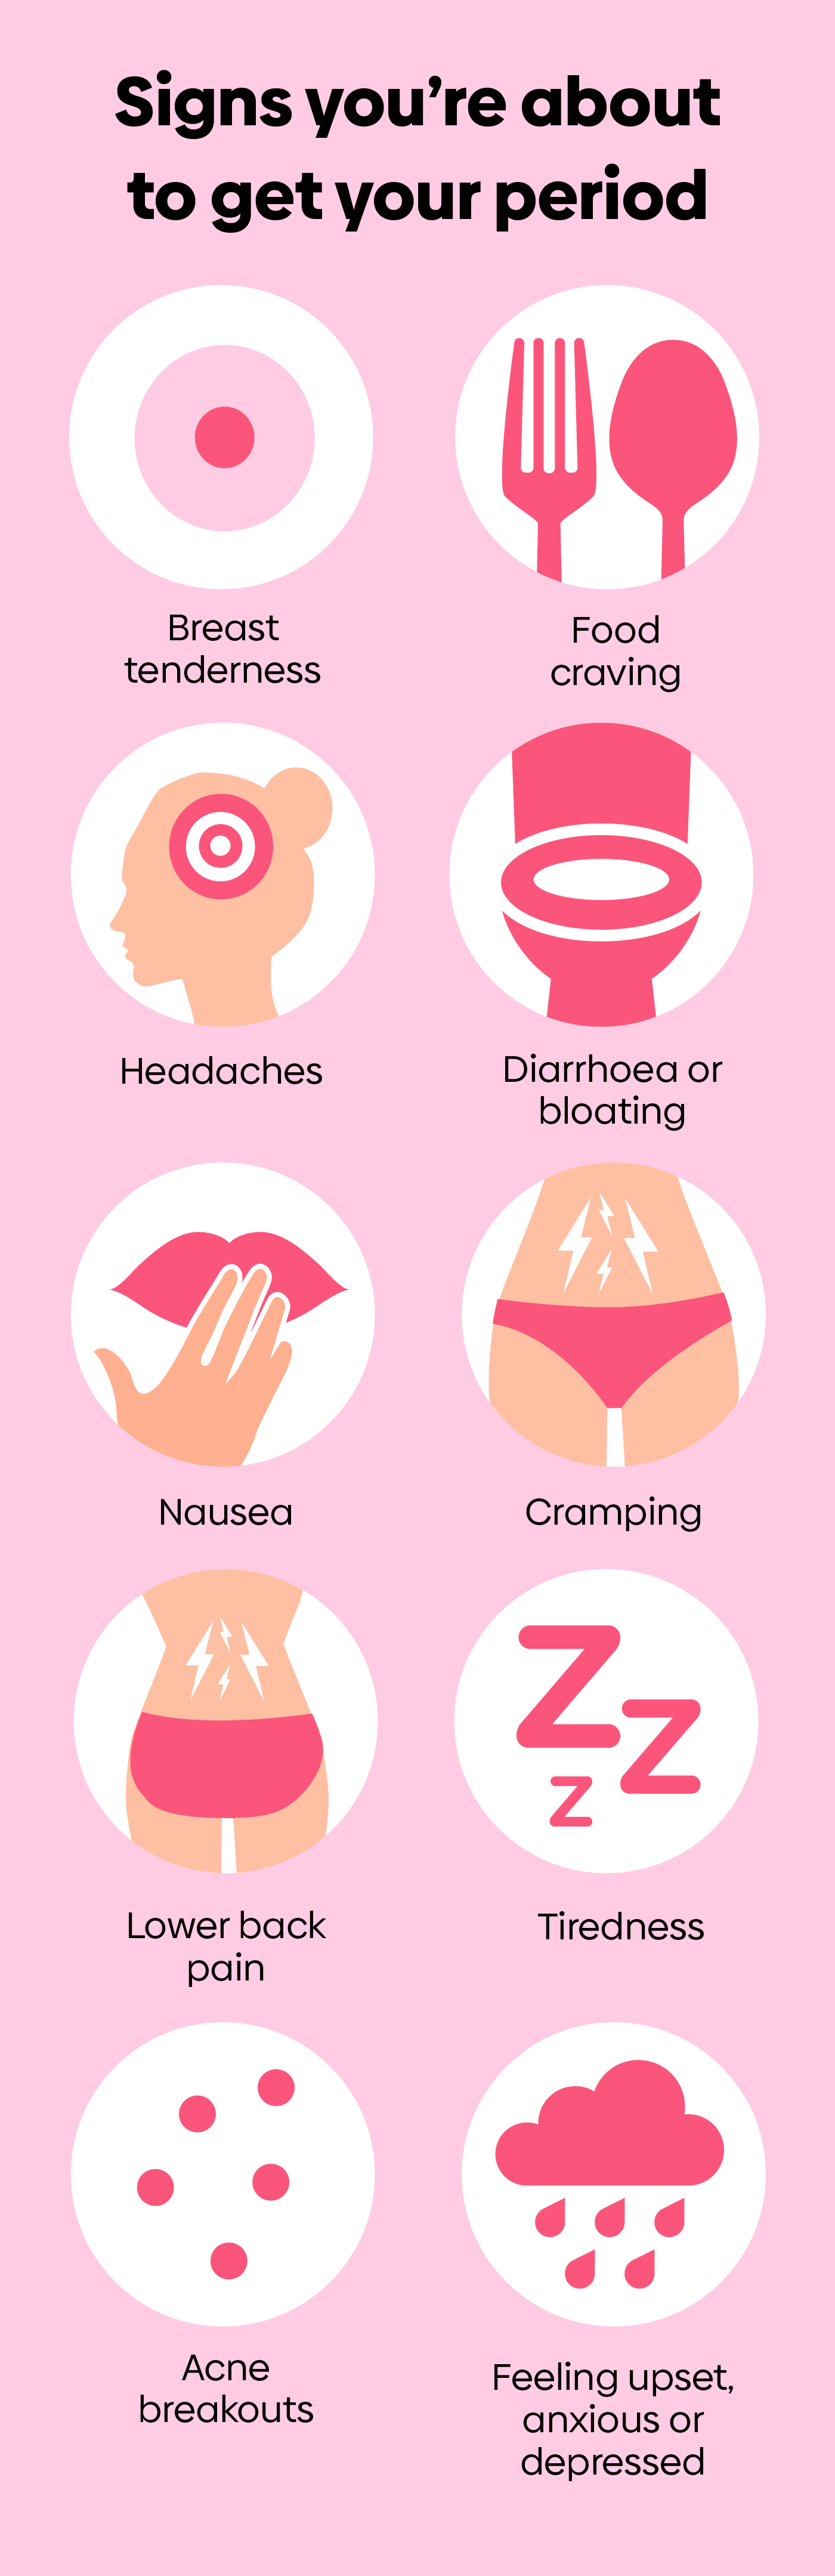 10 period symptoms: everything you want to know